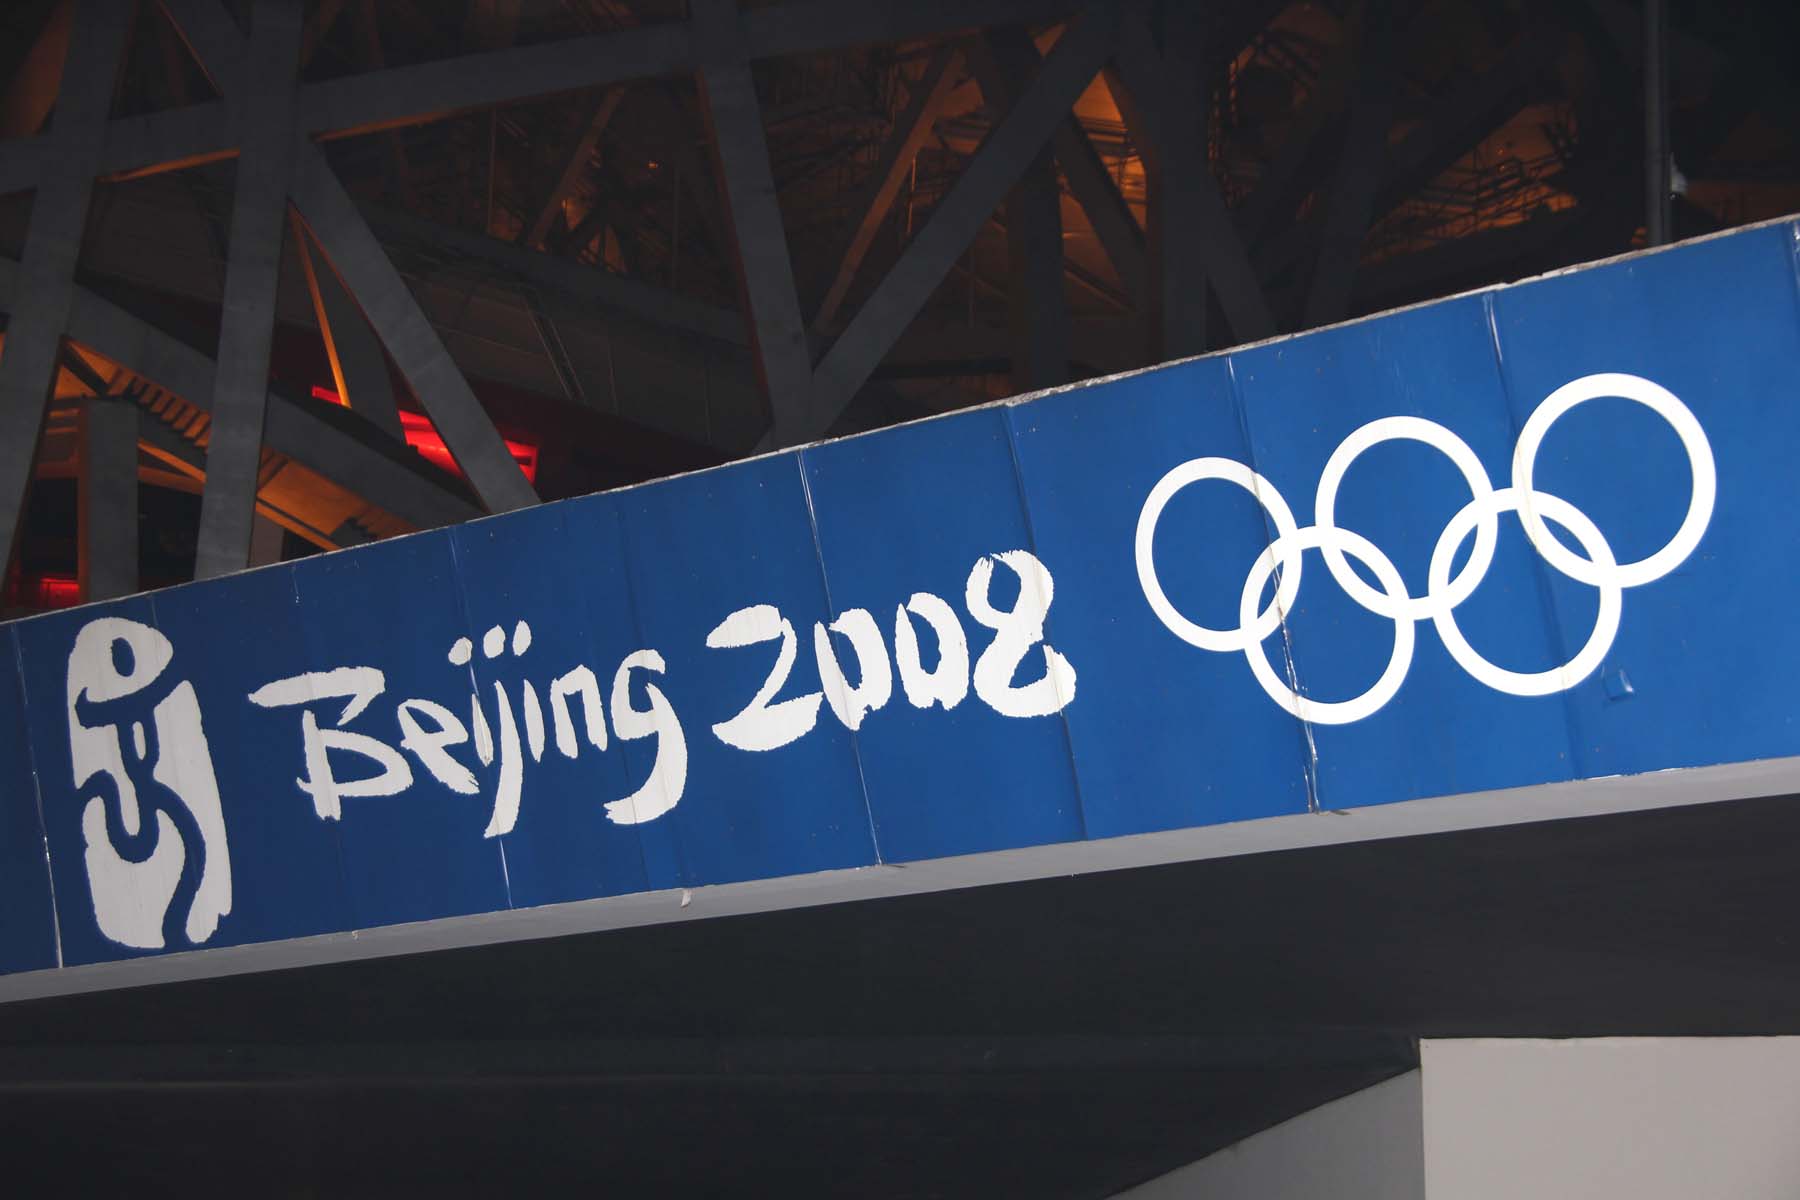 Sign at the Birds Nest Stadium for the 2008 Beijing Olympics.